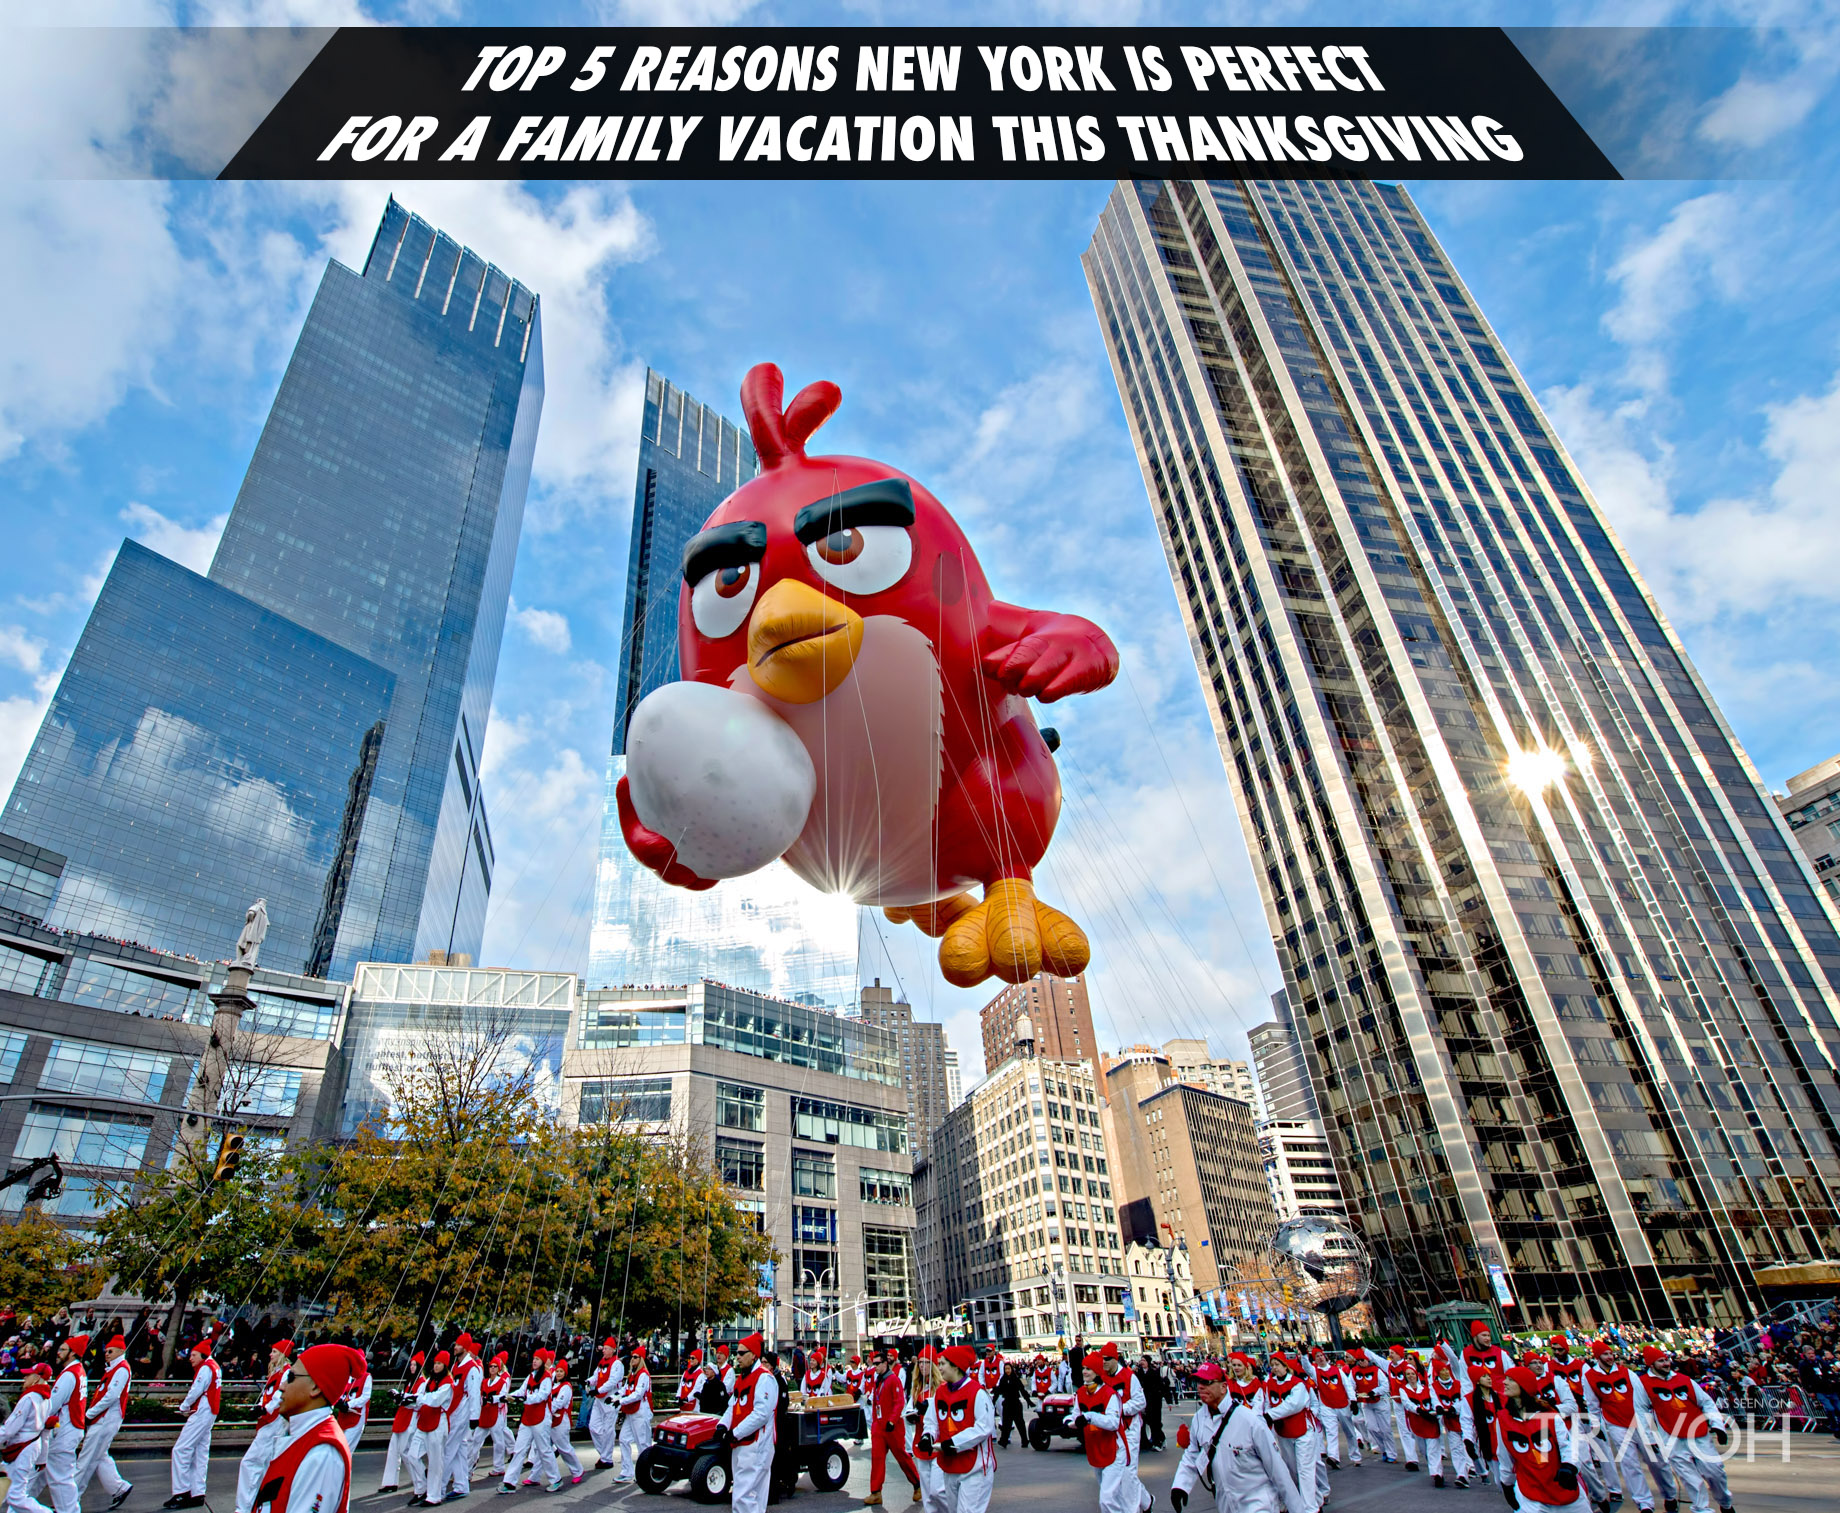 Top 5 Reasons New York is Perfect for a Family Vacation this Thanksgiving